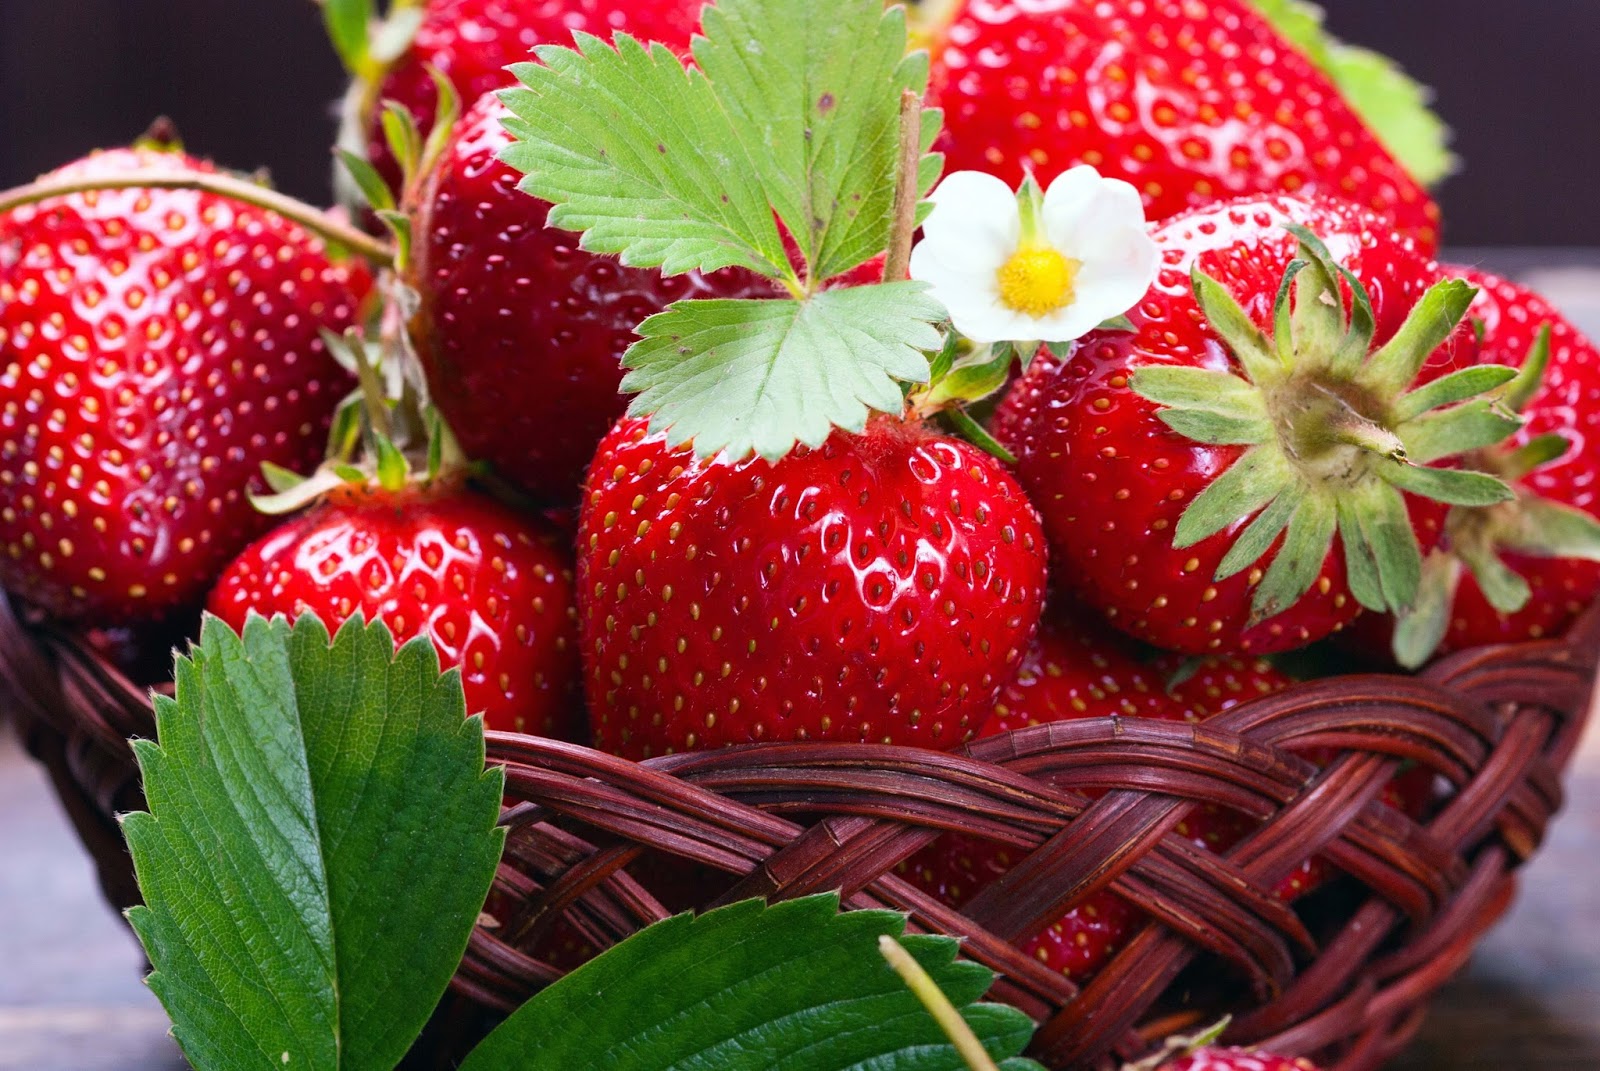 fruit wallpaper hd,natural foods,strawberry,strawberries,fruit,berry